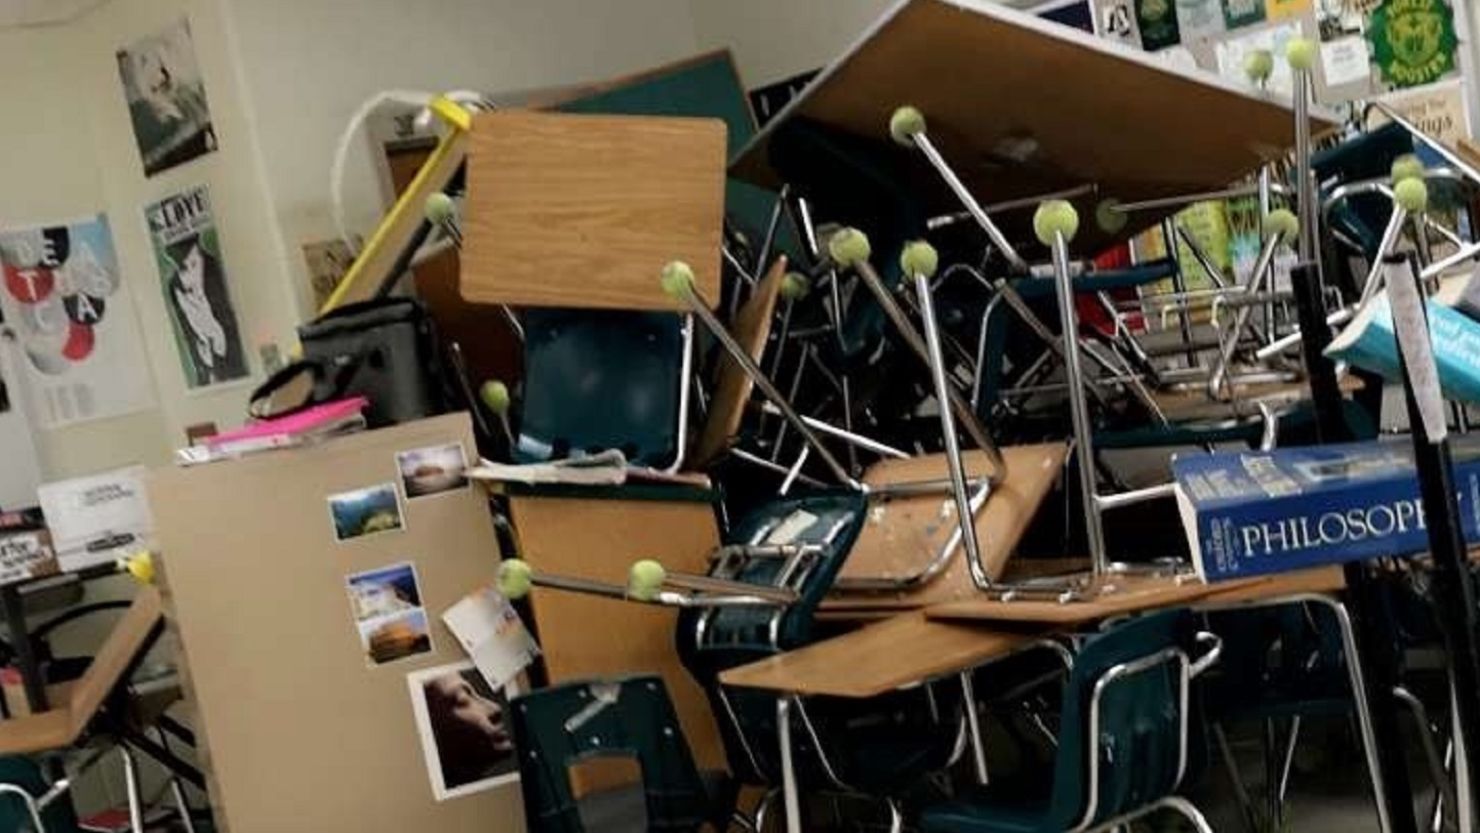 Students at Forest High School in  Ocala, Florida, used desks, chairs and even file cabinets to barricade themselves in their classroom.